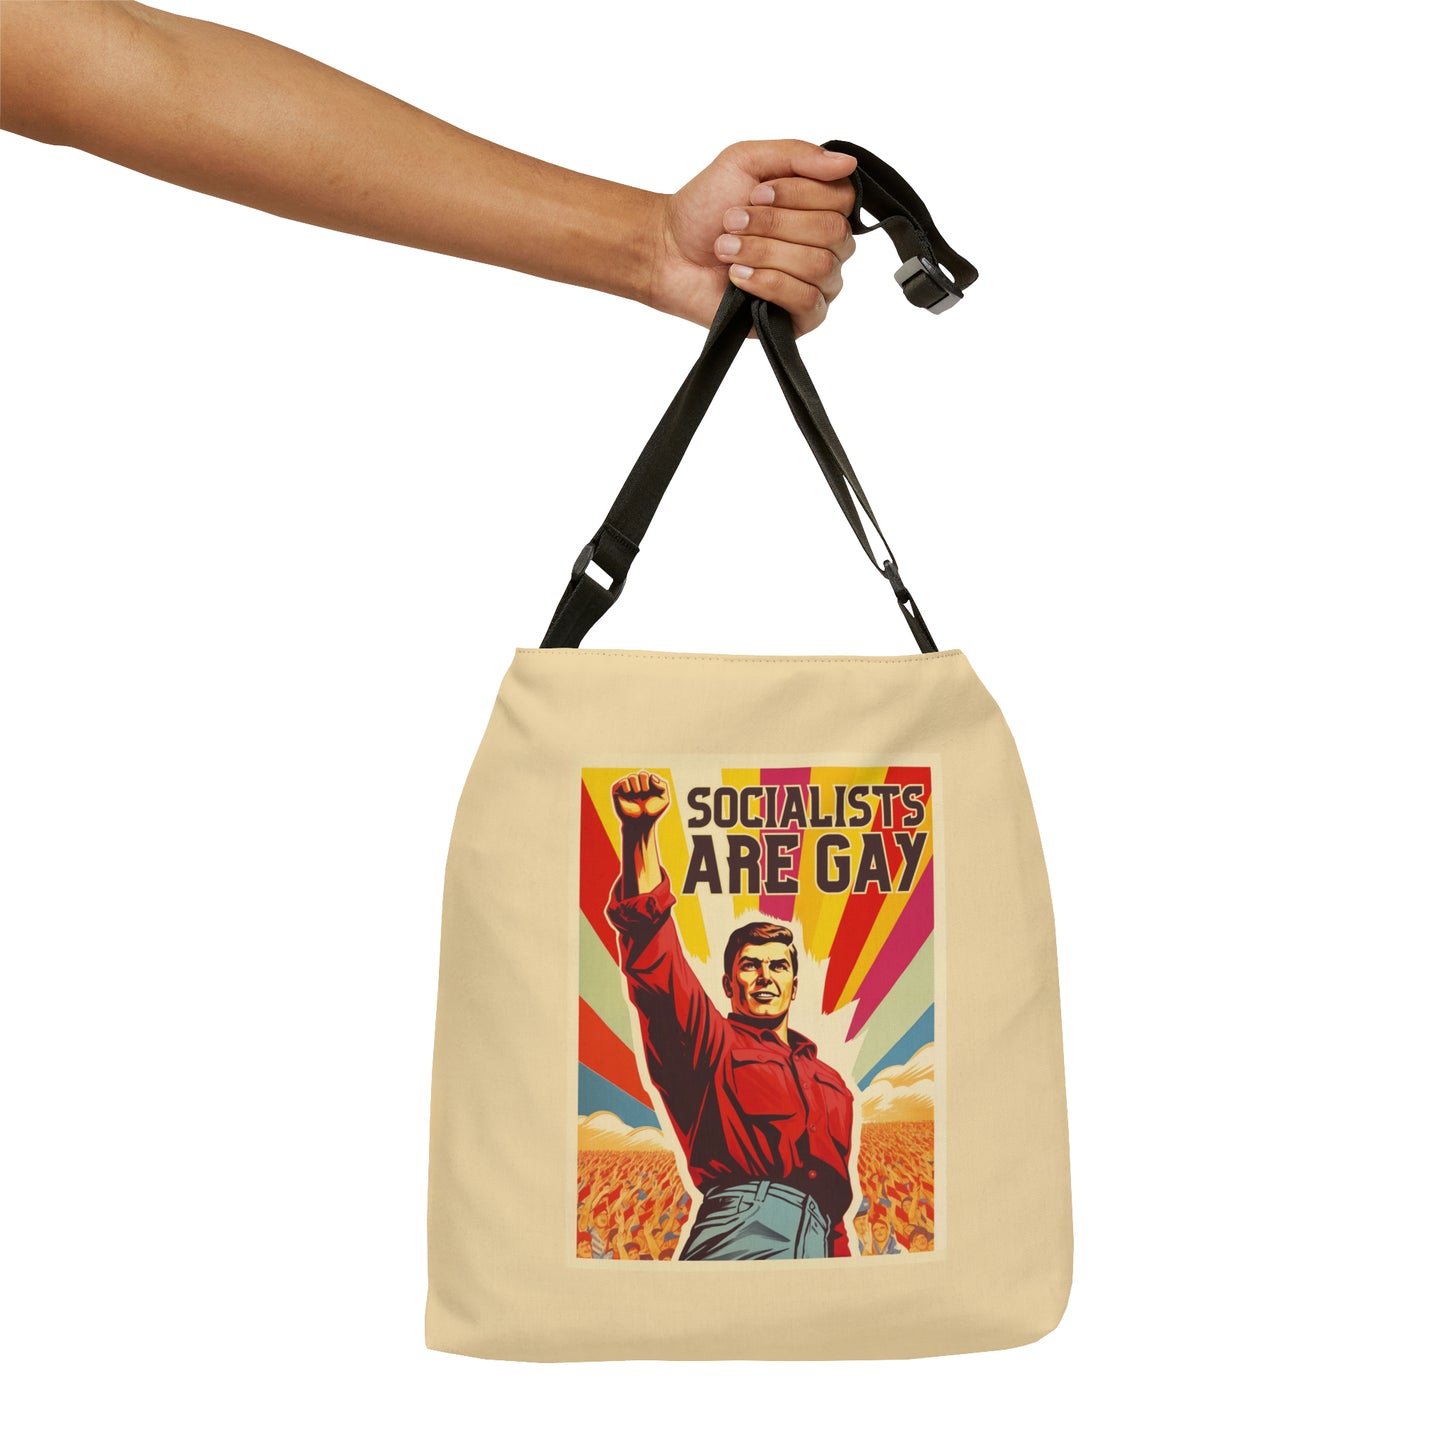 Socialists Are Gay Adjustable Tote Bag